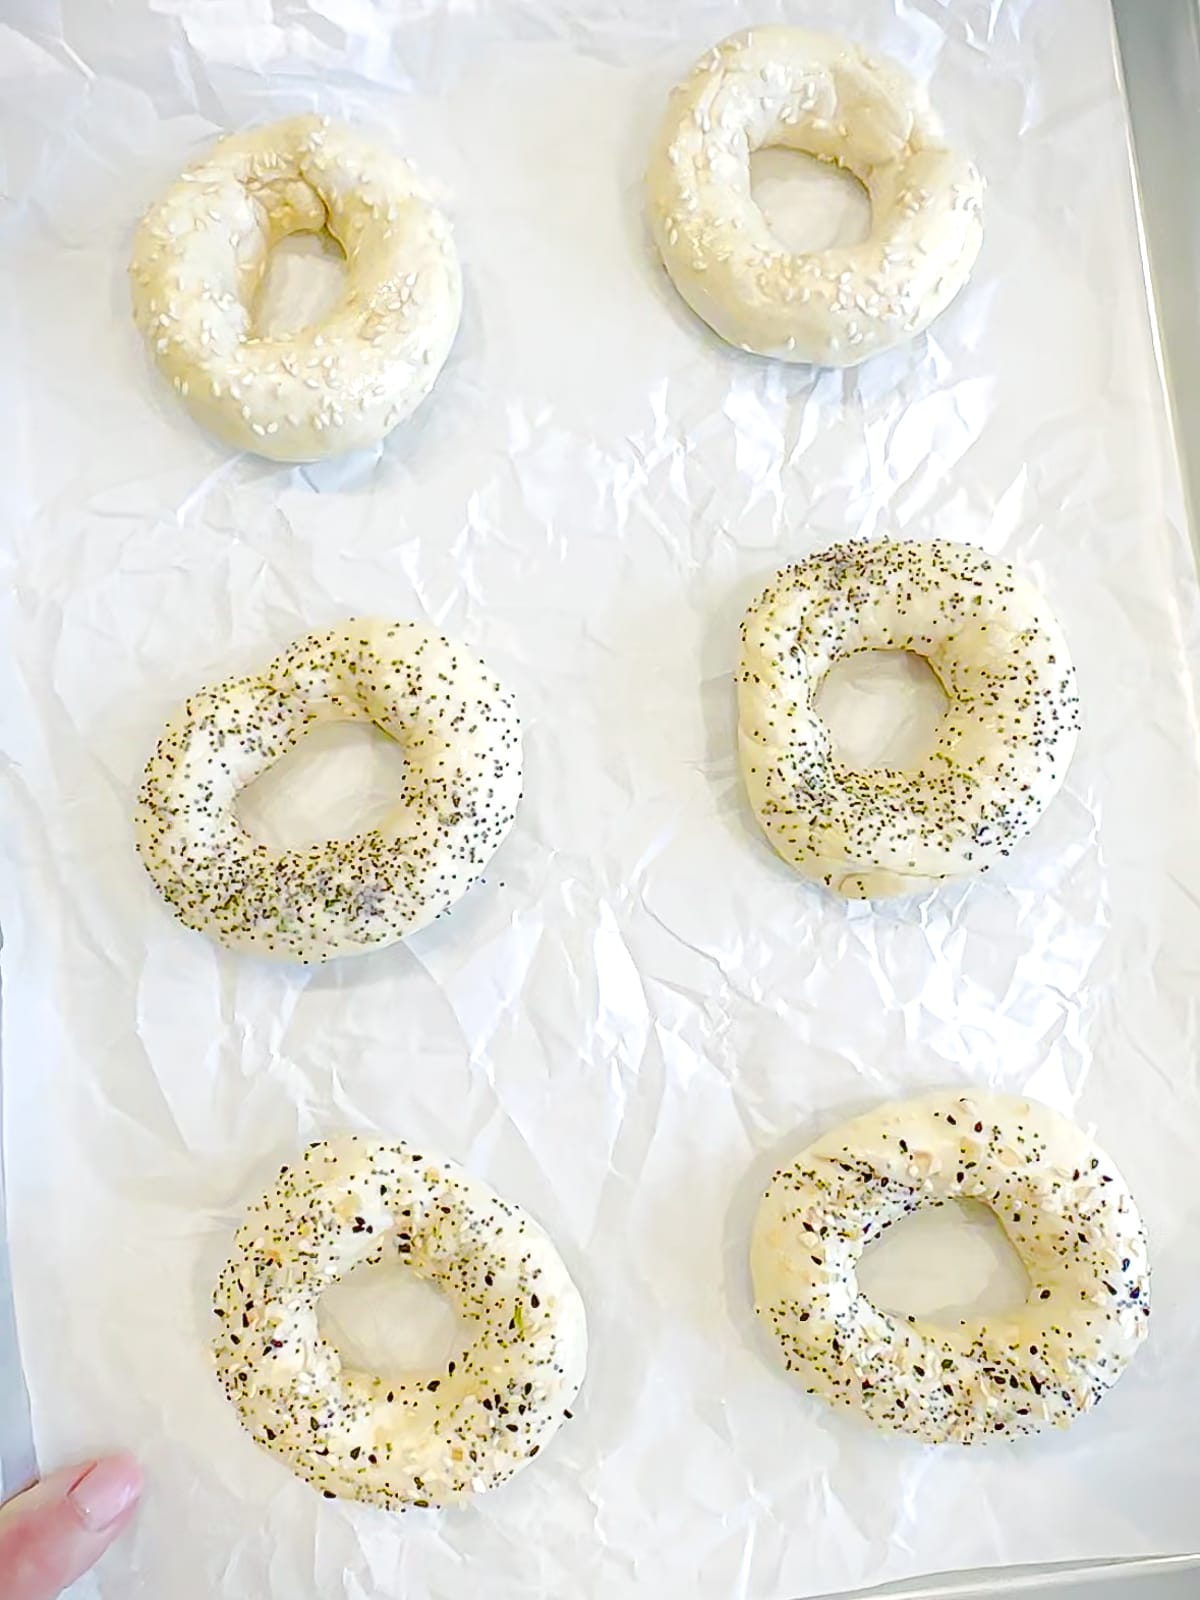 Unbaked two ingredient bagels with toppings, ready to go into the oven.